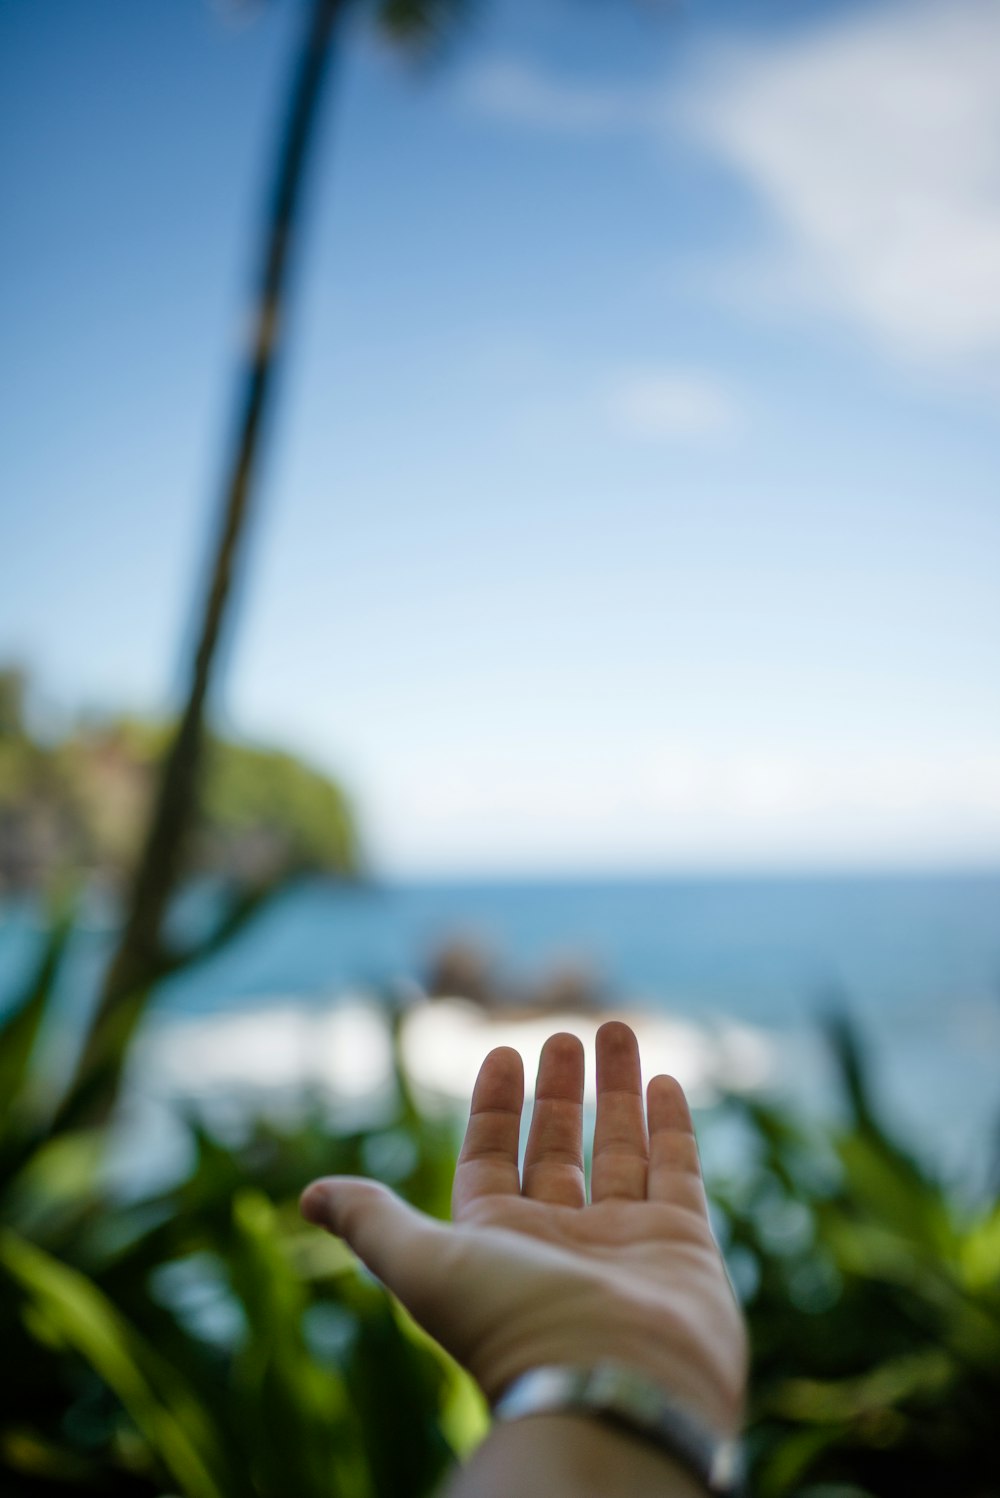 a person's hand reaching out towards the ocean